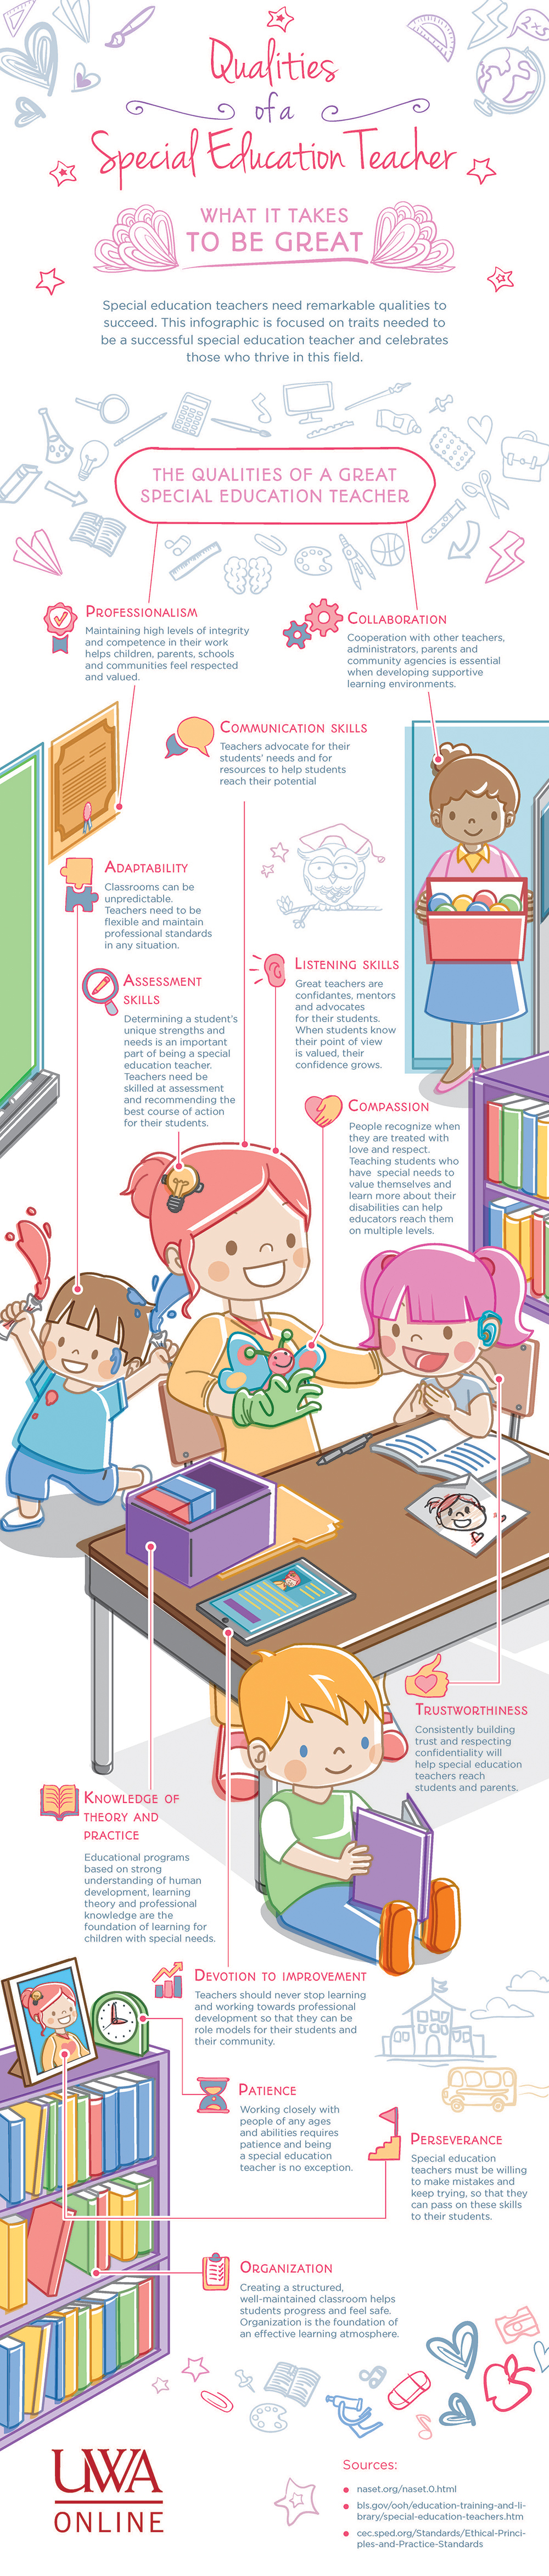 Qualities of a Special Education Teacher [Infographic] | UWA Online